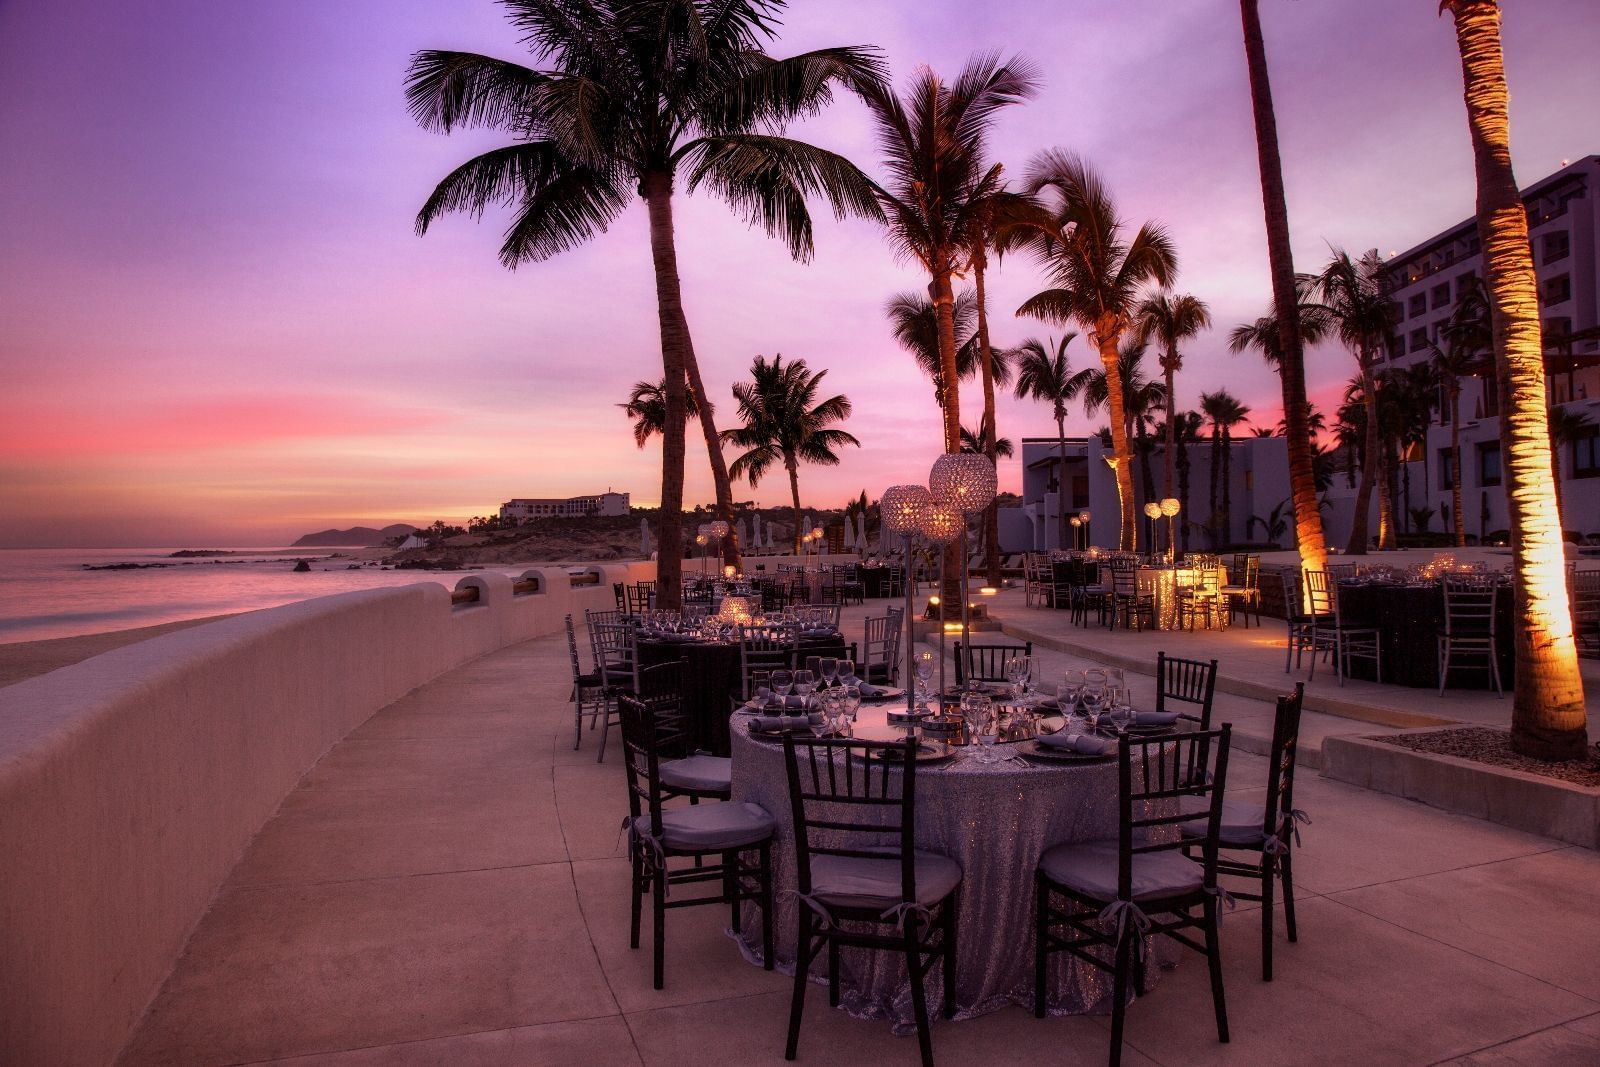 Outdoor dining area during the beautiful sunset at Los Cabos